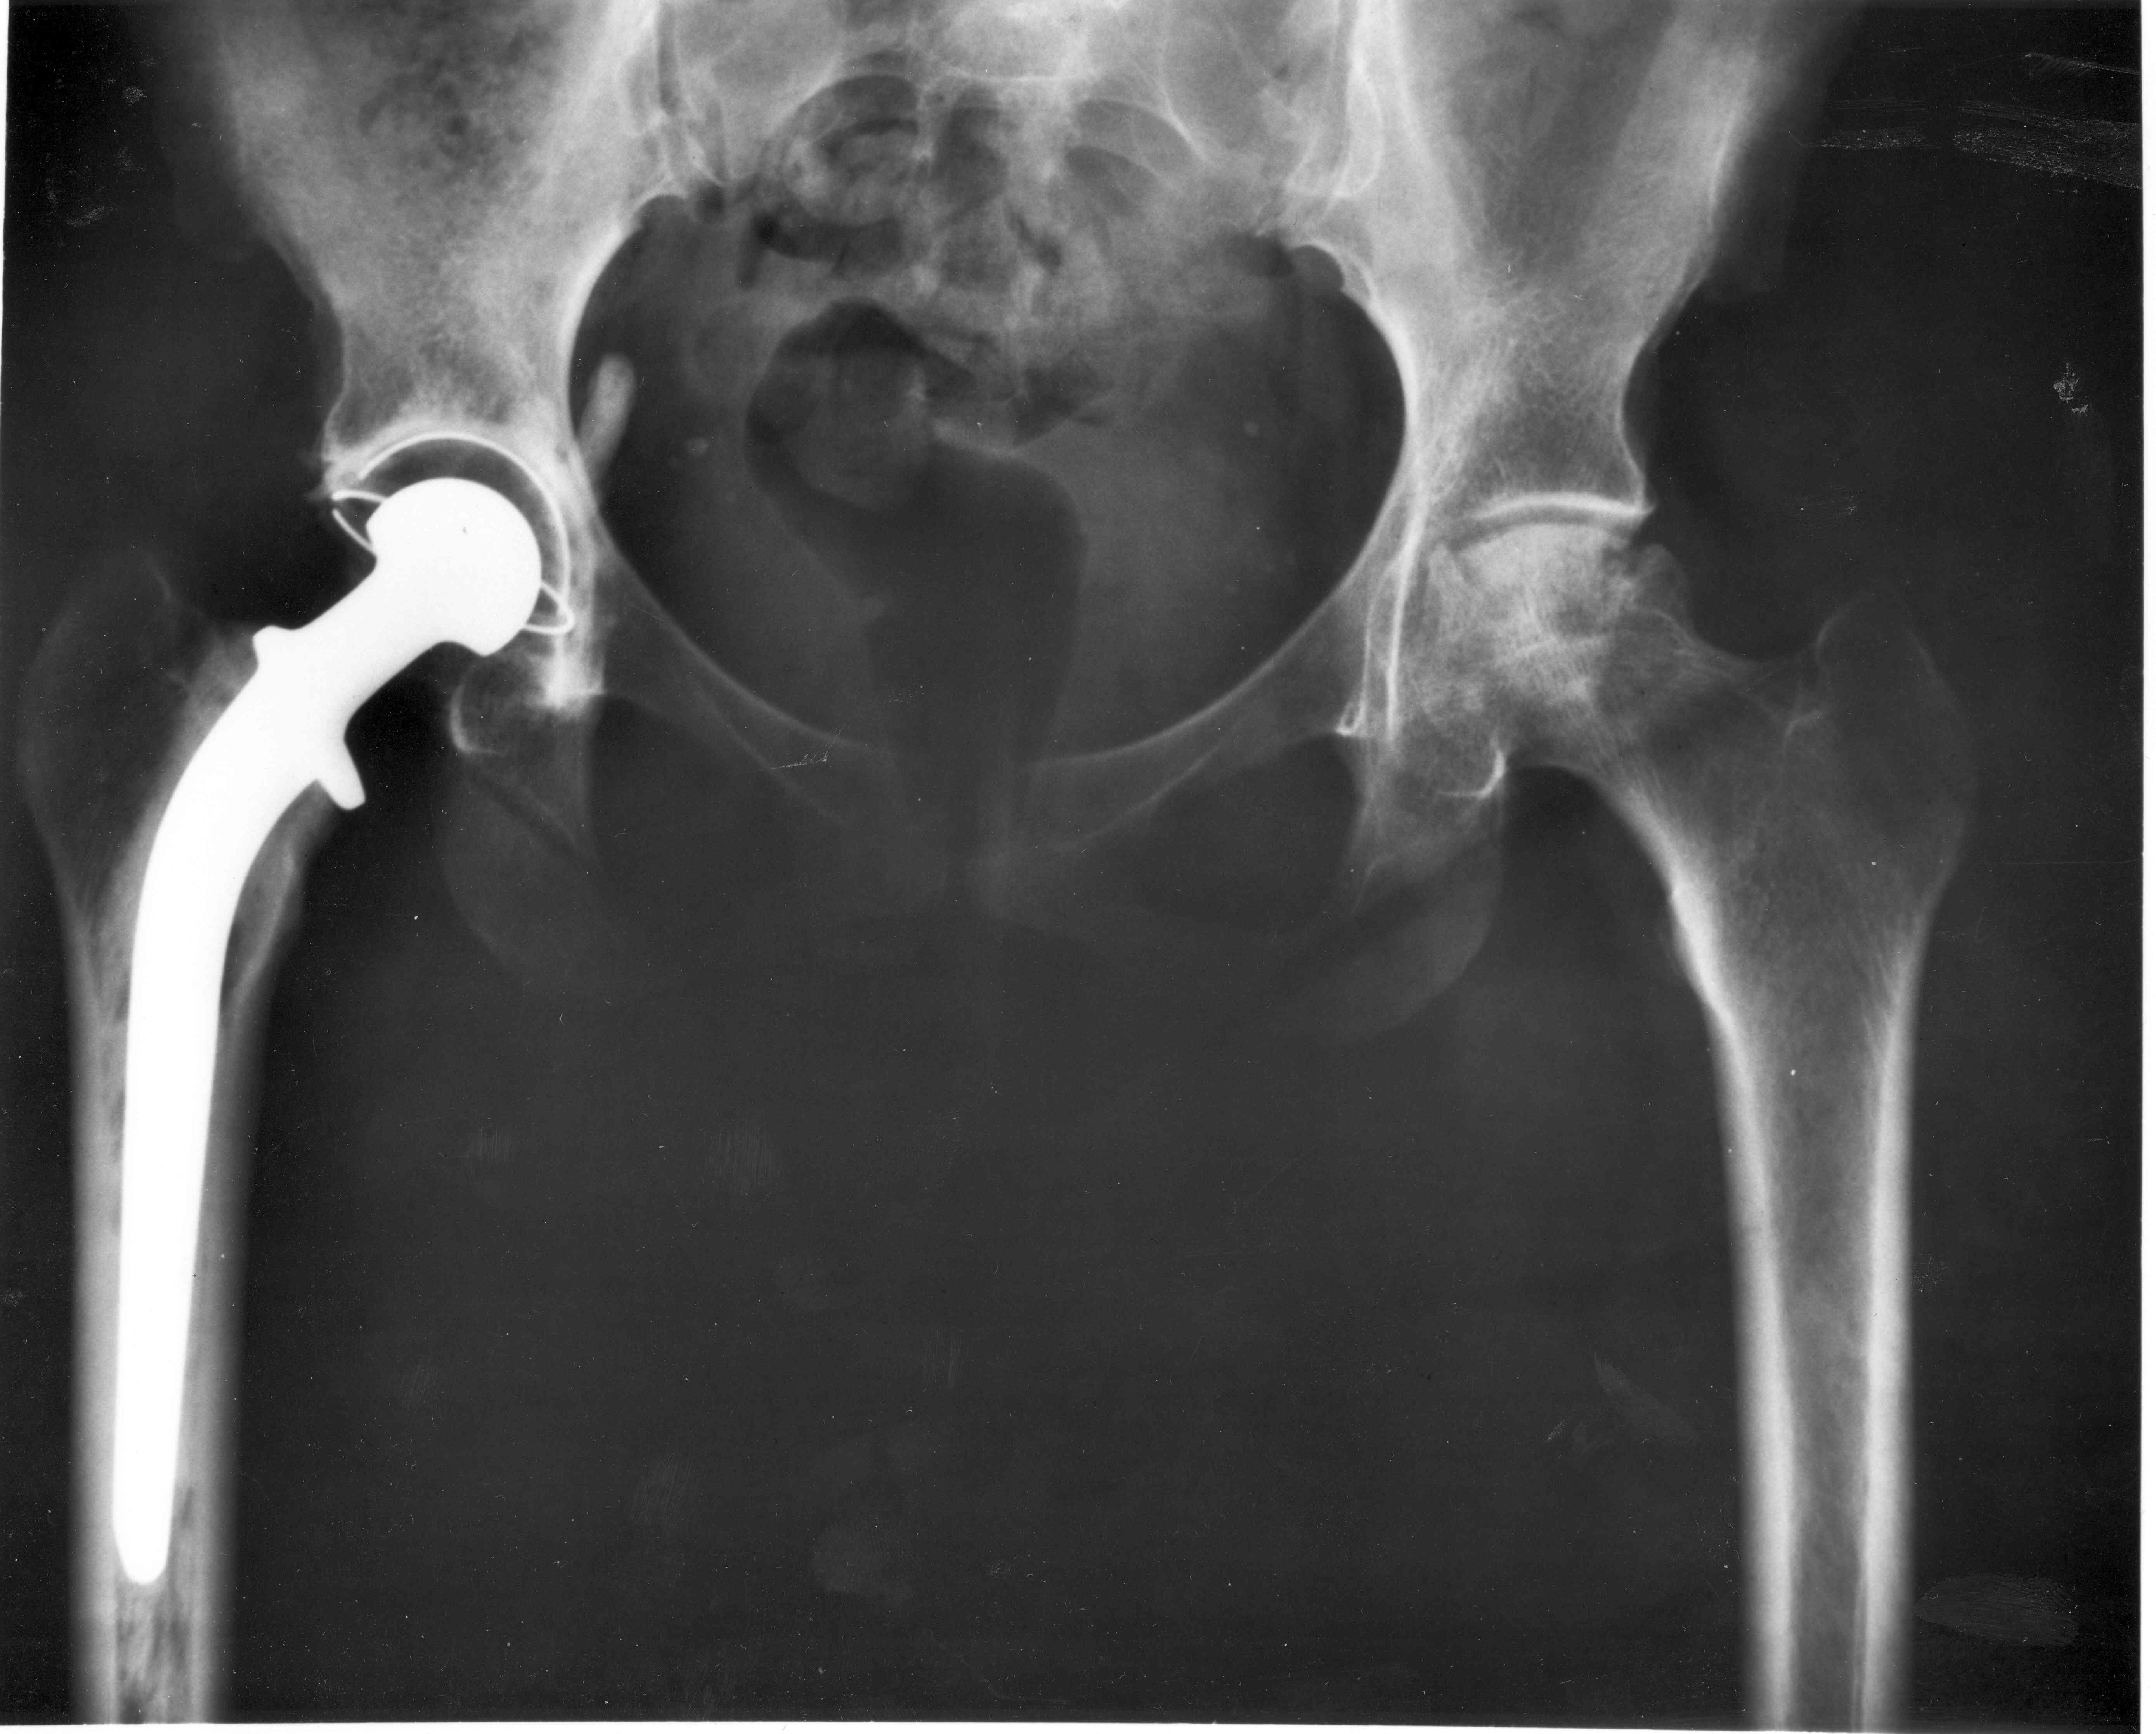 Replacement hip joint